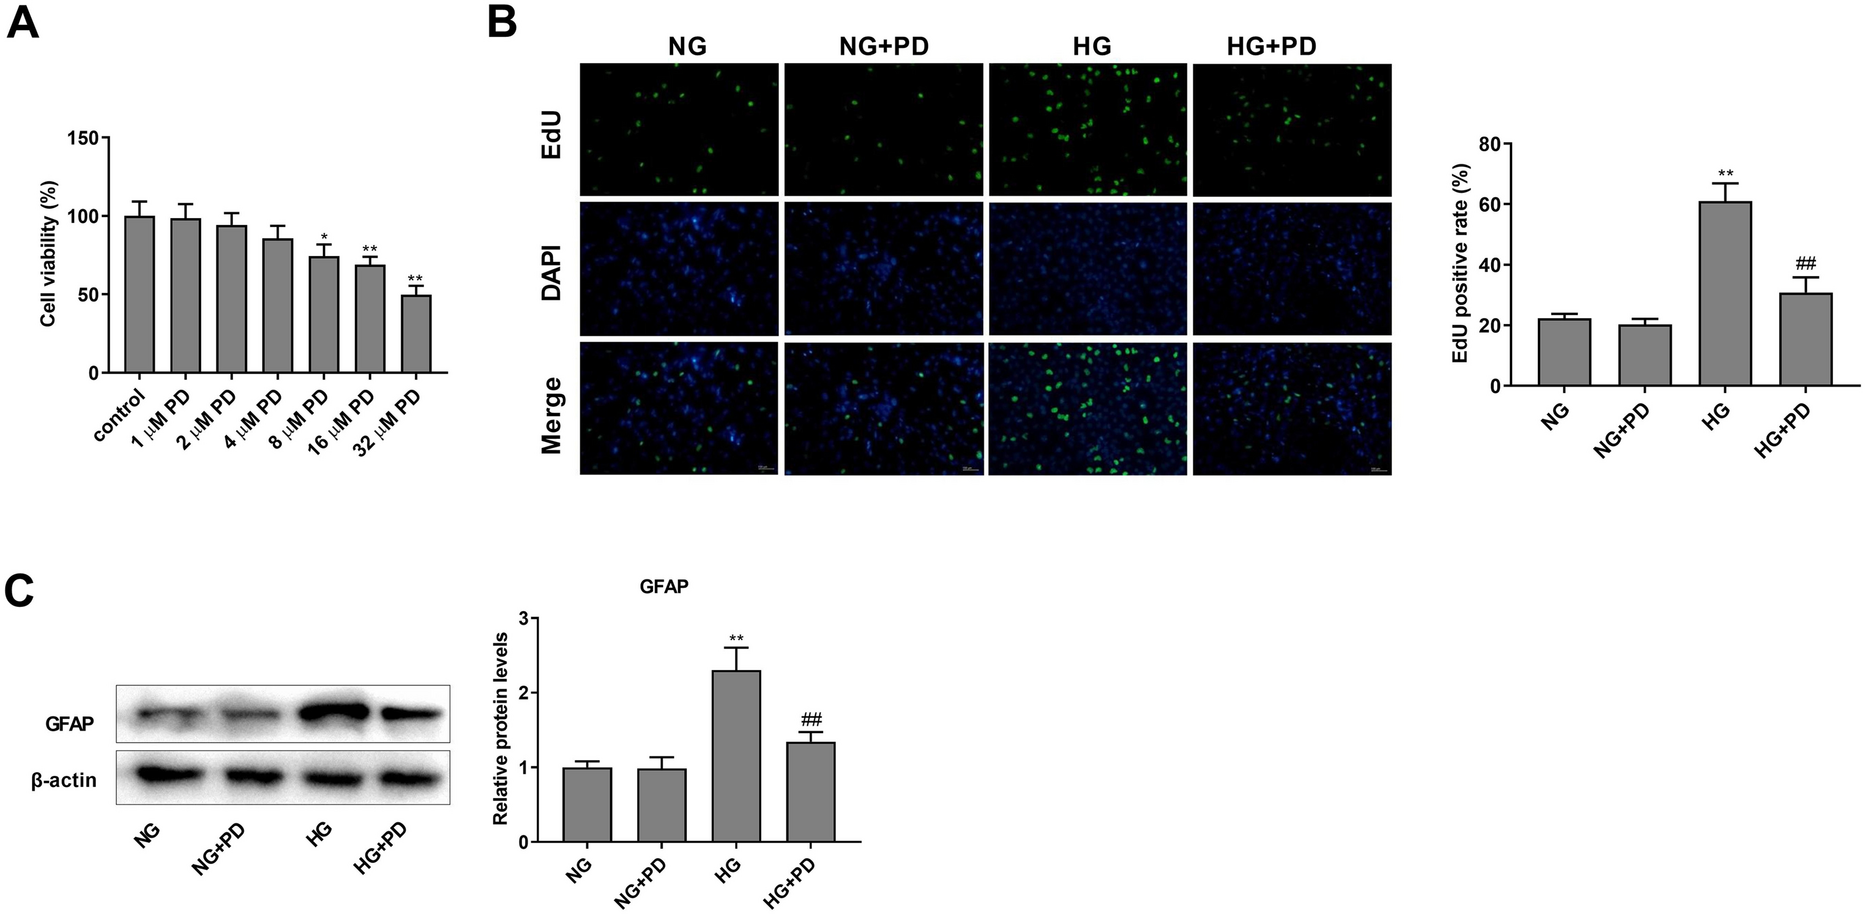 PD protects Müller cells through the SIRT1/NLRP3 inflammasome pathway